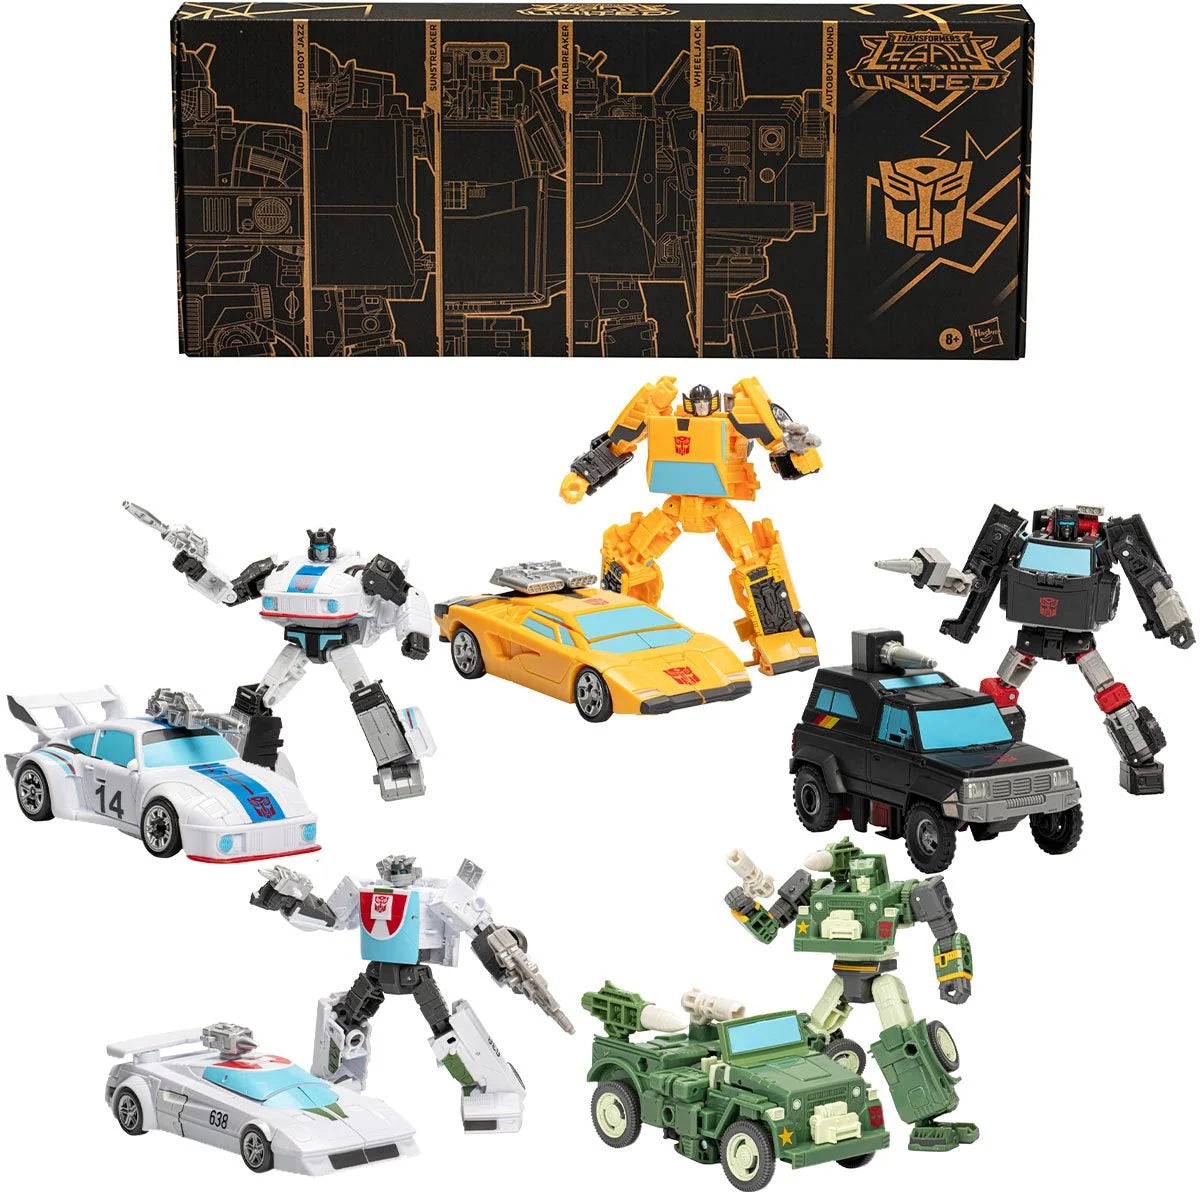 Transformers Generations Selects Legacy United Autobots Stand United 5-Pack box art